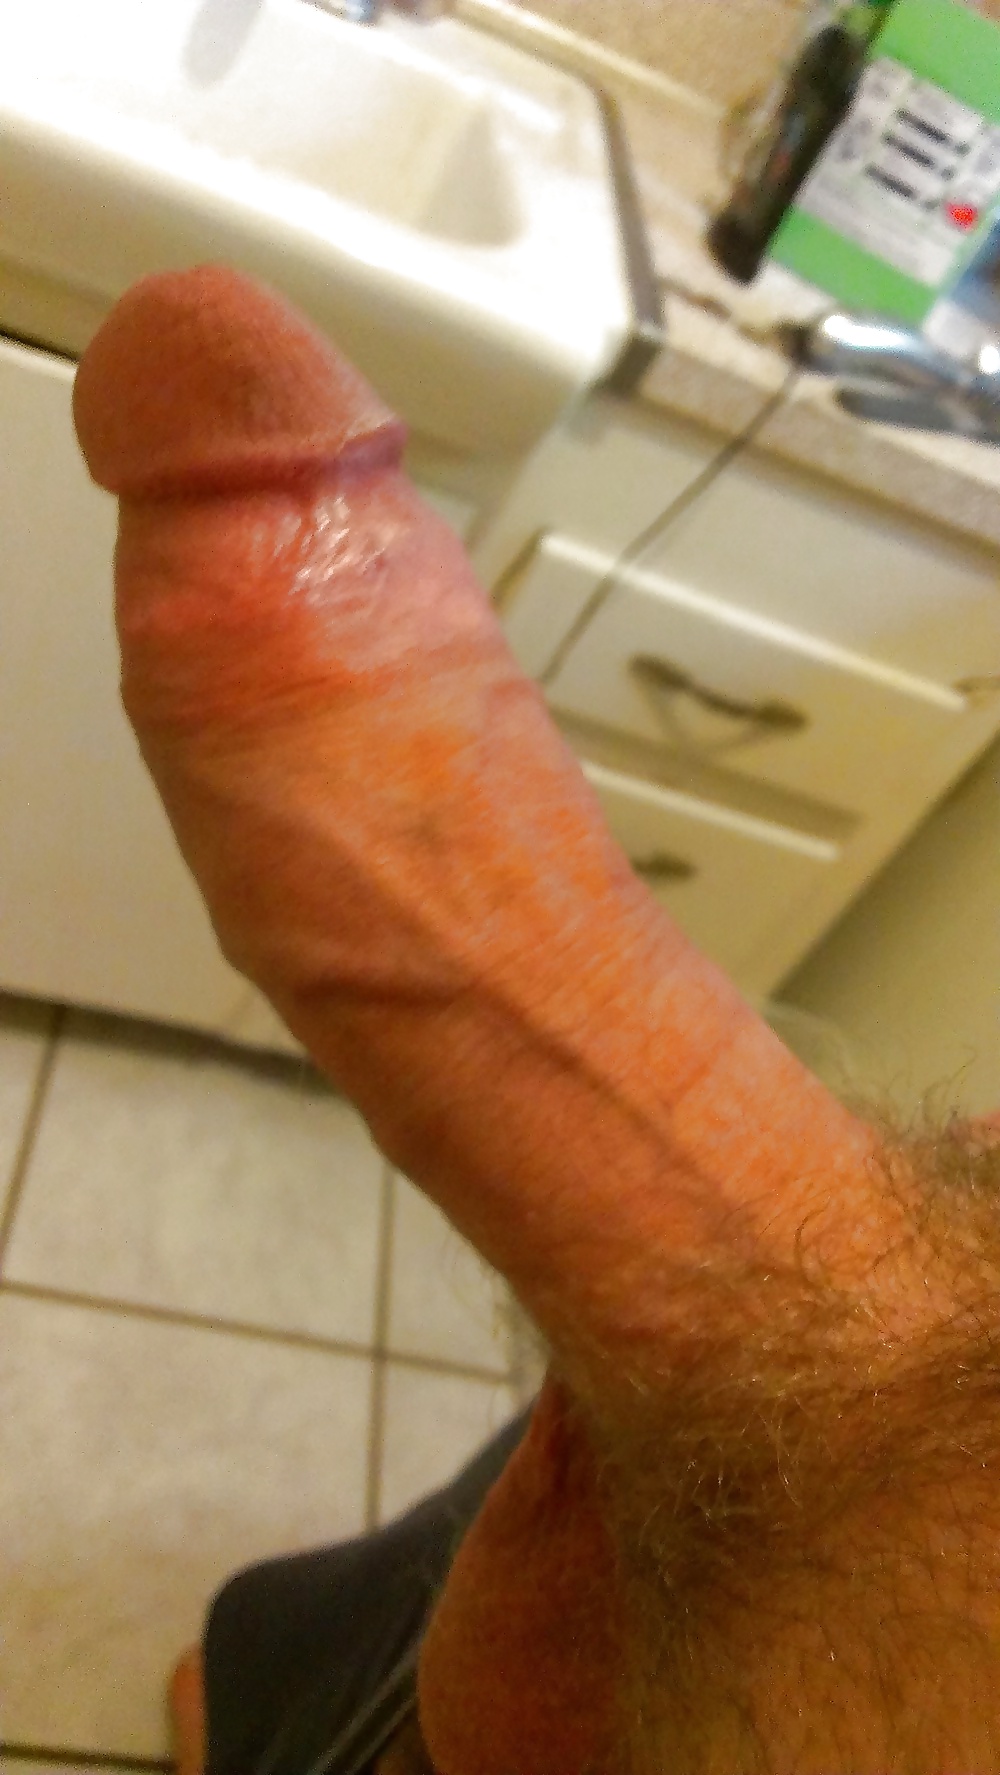 Sex my cock getting service image